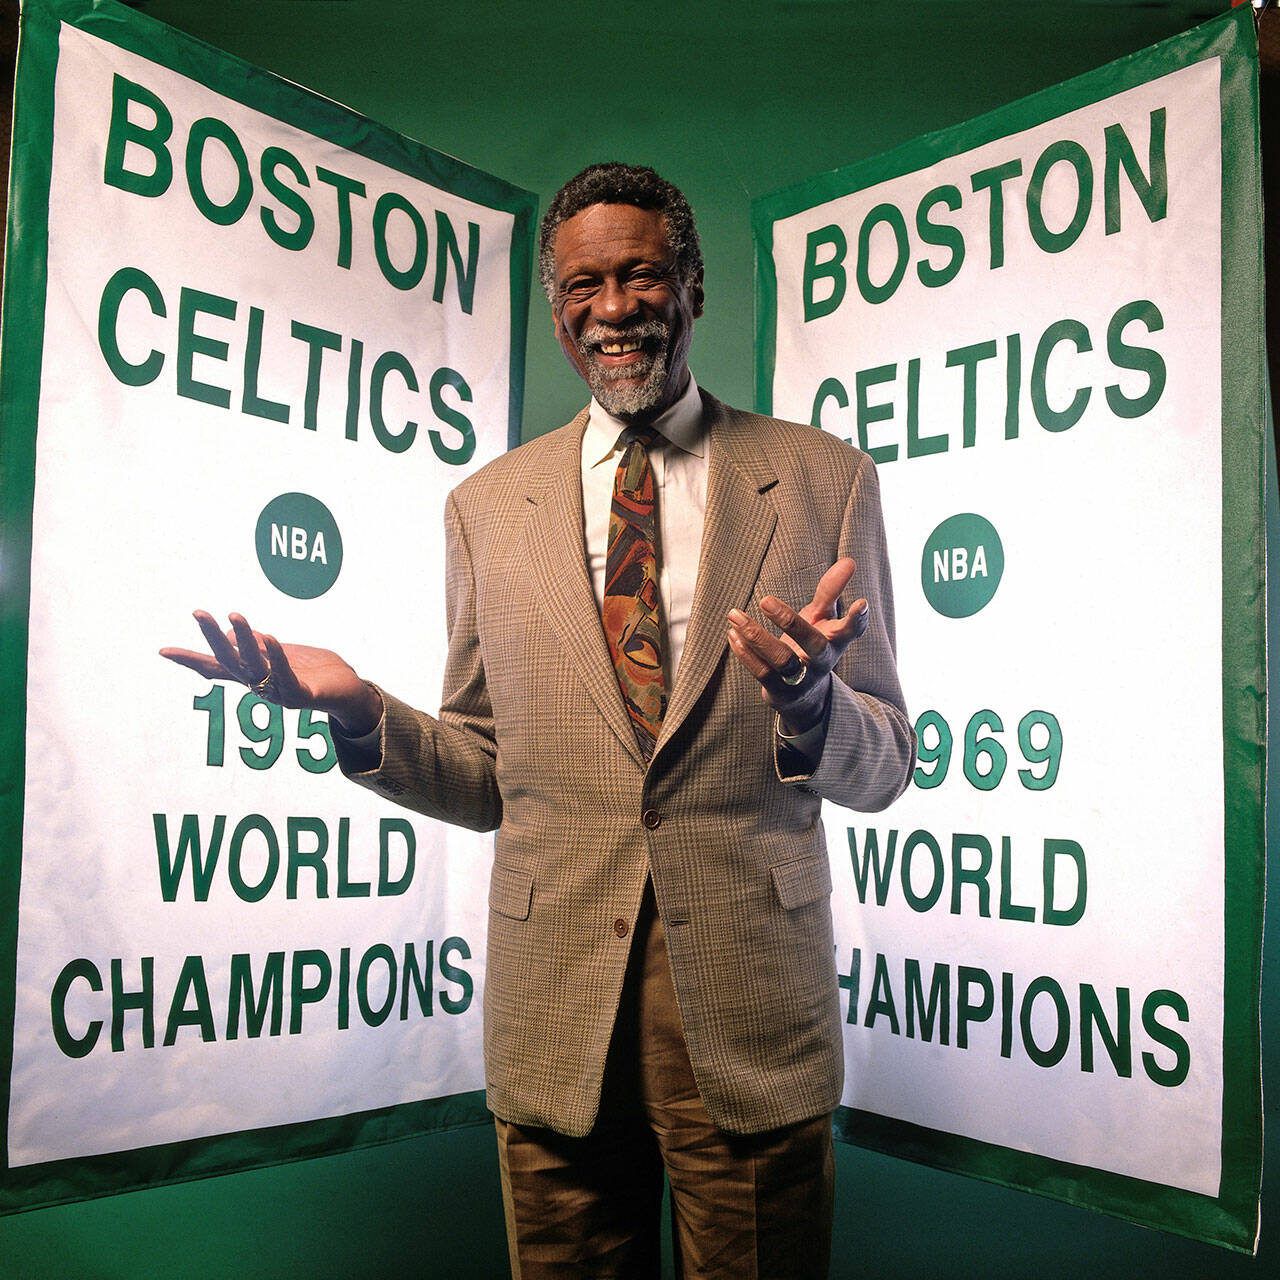 Bill Russell. Photo courtesy of the National Basketball Association (NBA) Twitter